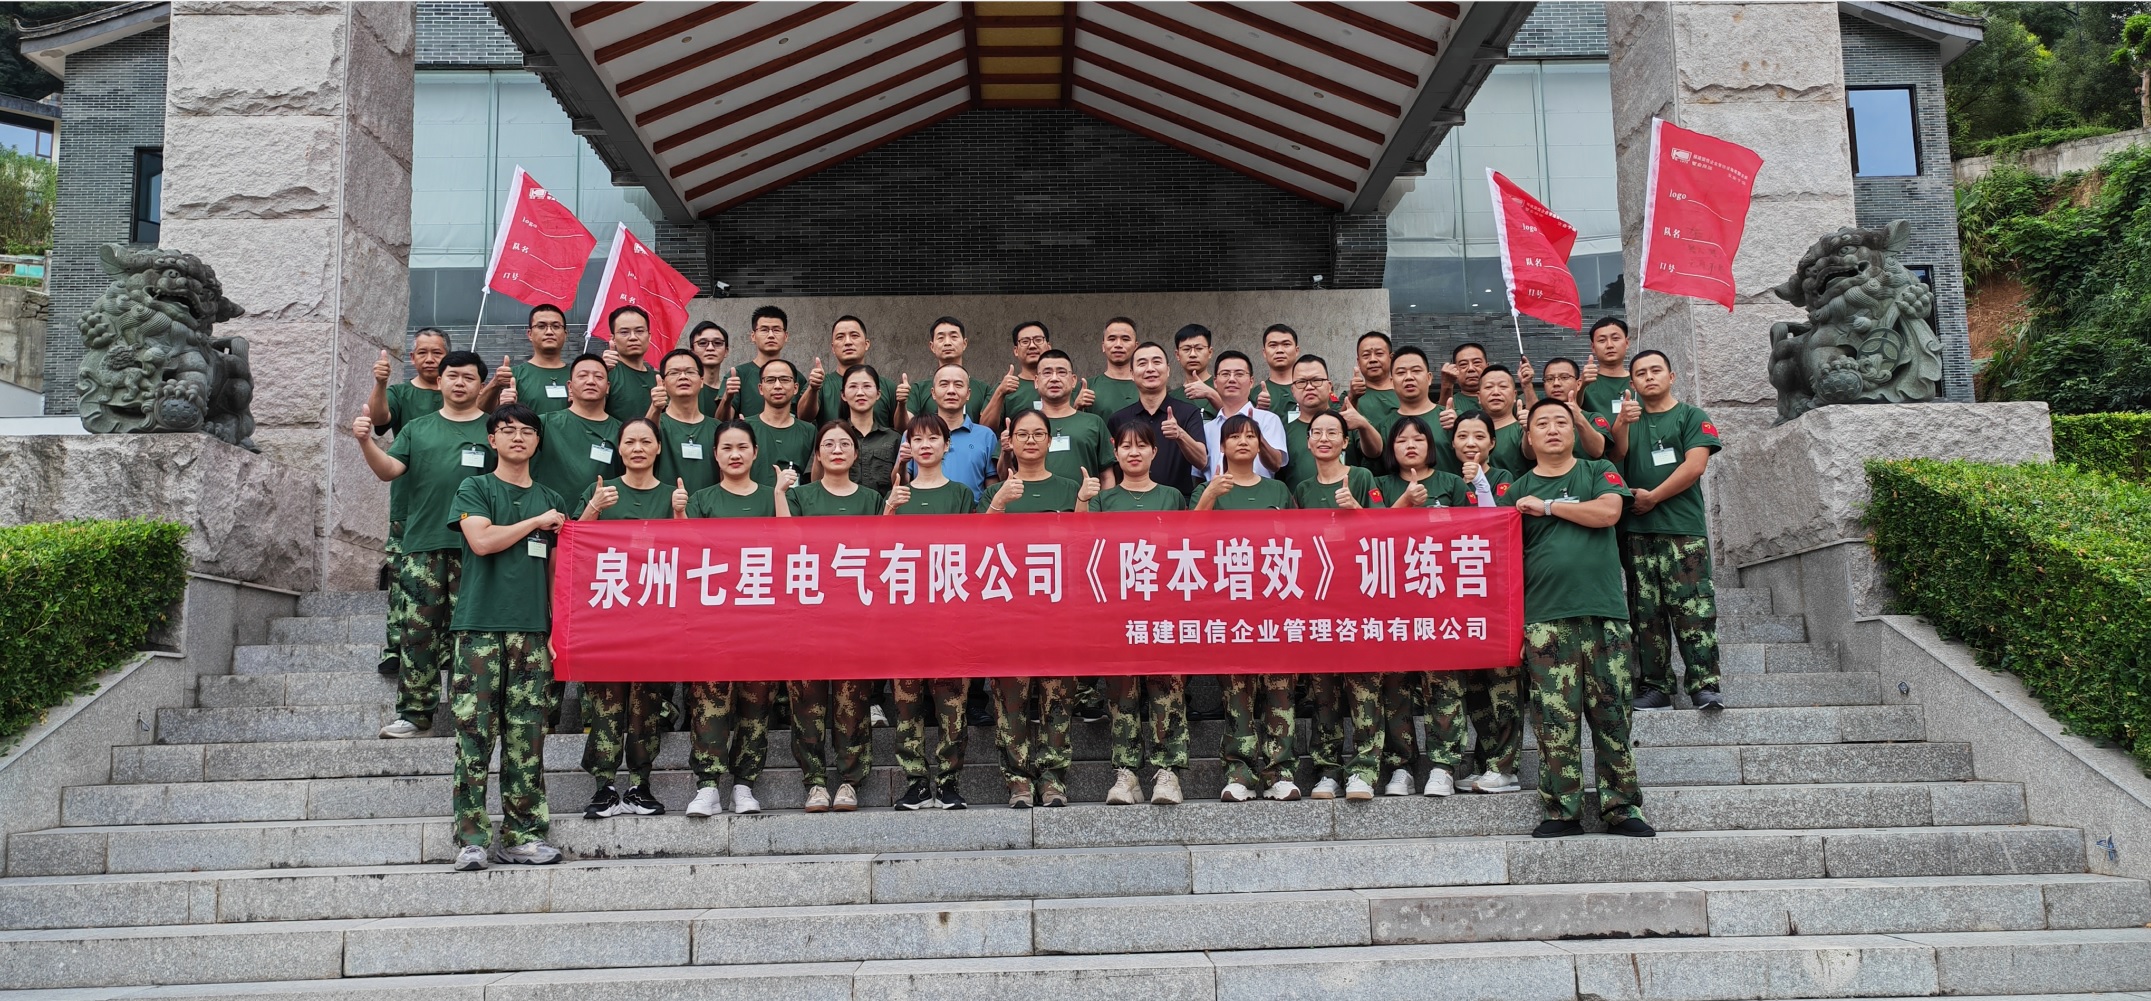 Seven Star successfully held the “Cost Reduction and Efficiency Increase” training camp to help enterprises reduce costs and improve competitiveness.